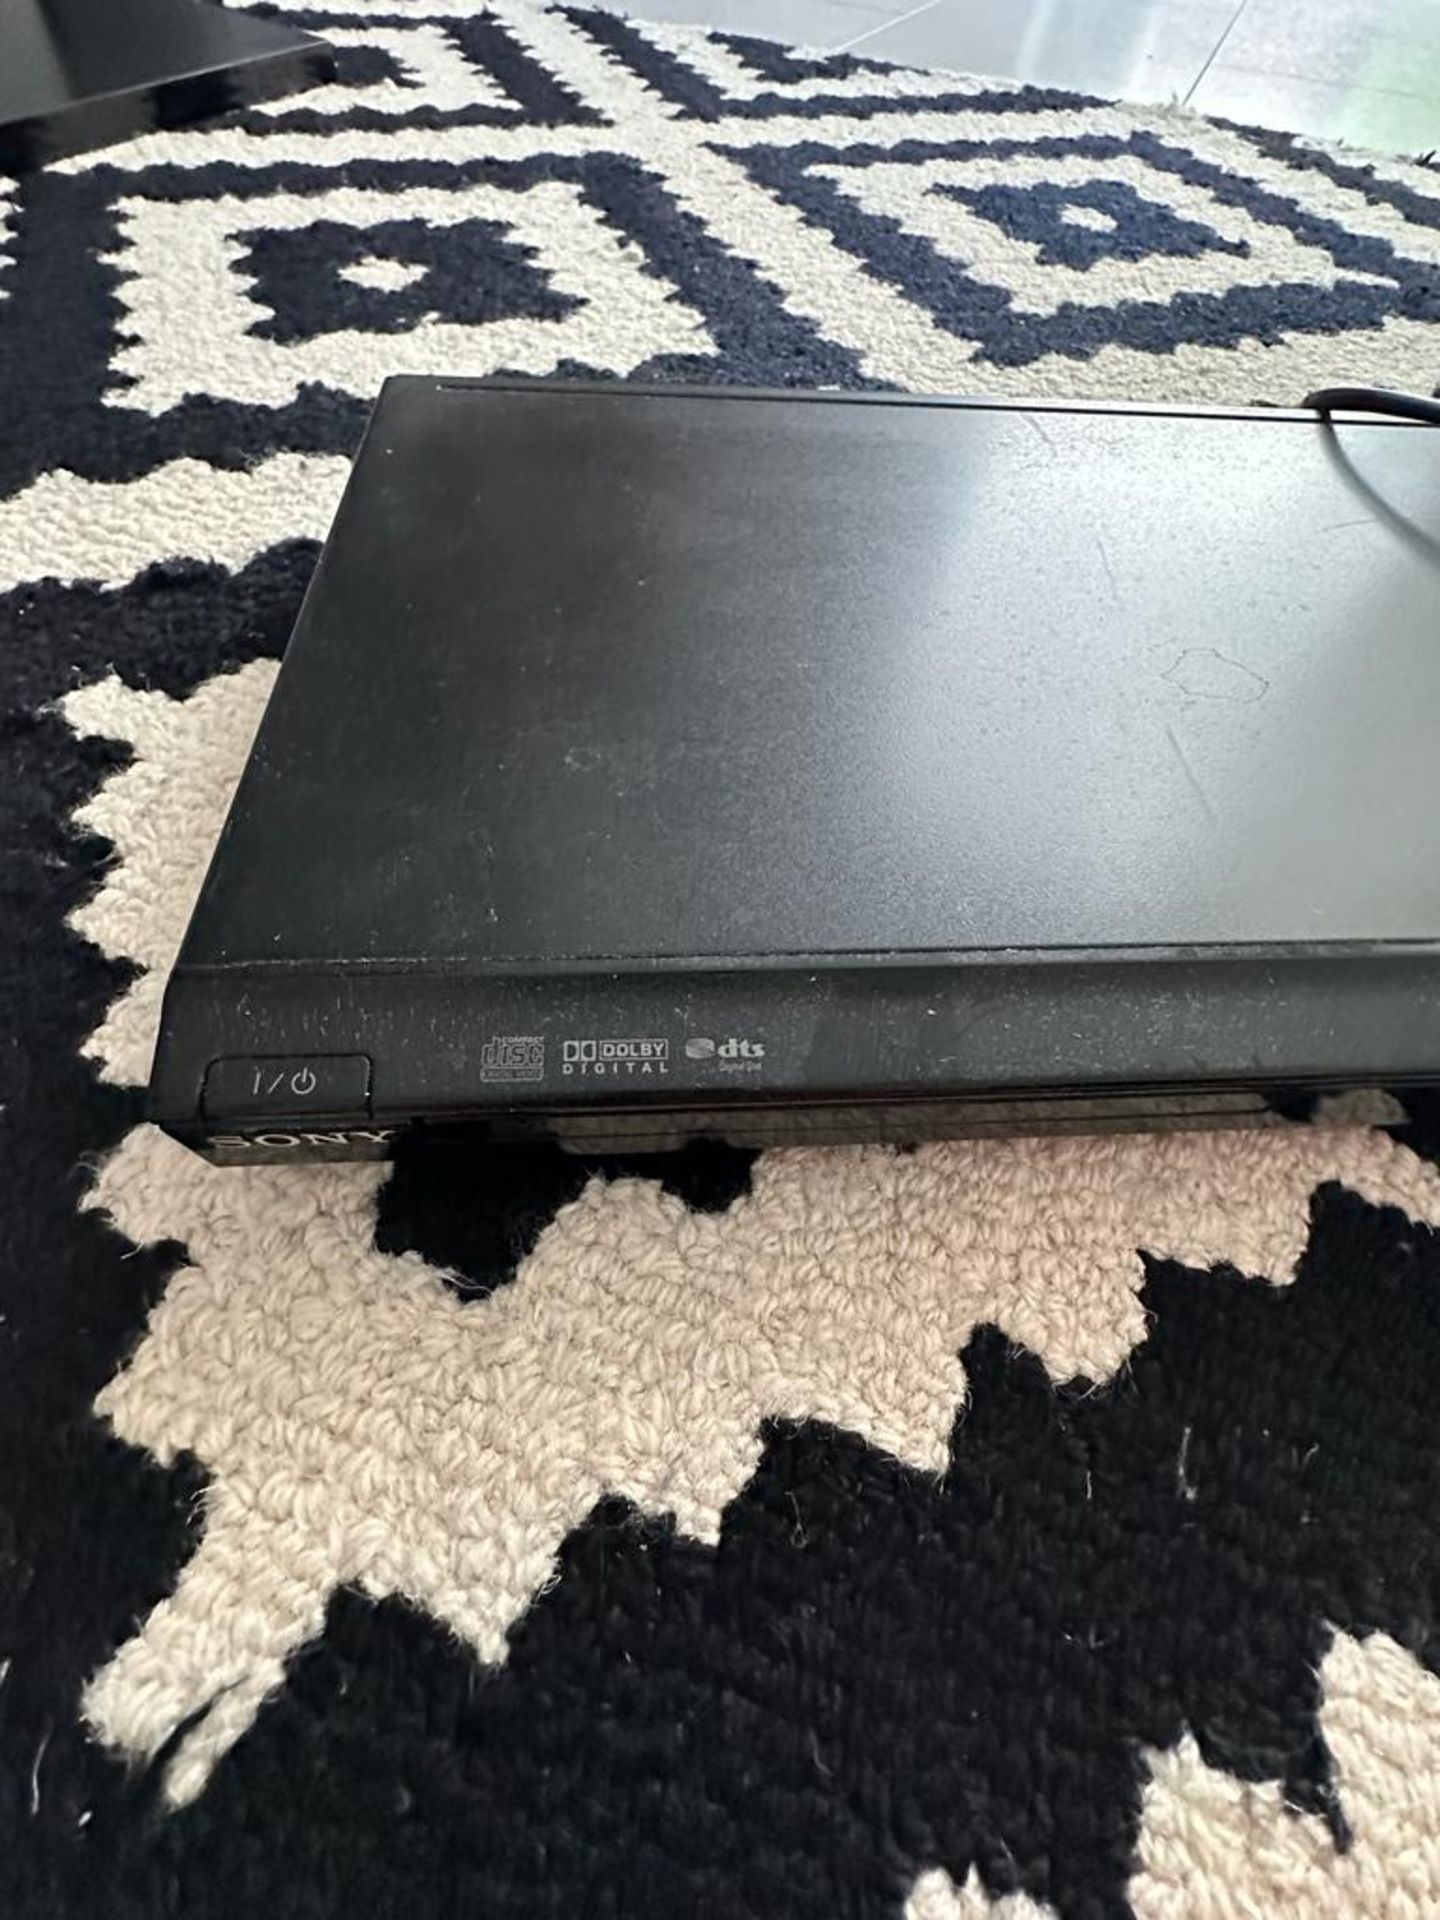 1 x SONY Dolby Digital DVD Player - Ref: GRG036 / WH2 - CL870 - Location: Altrincham WA14 This - Image 3 of 3